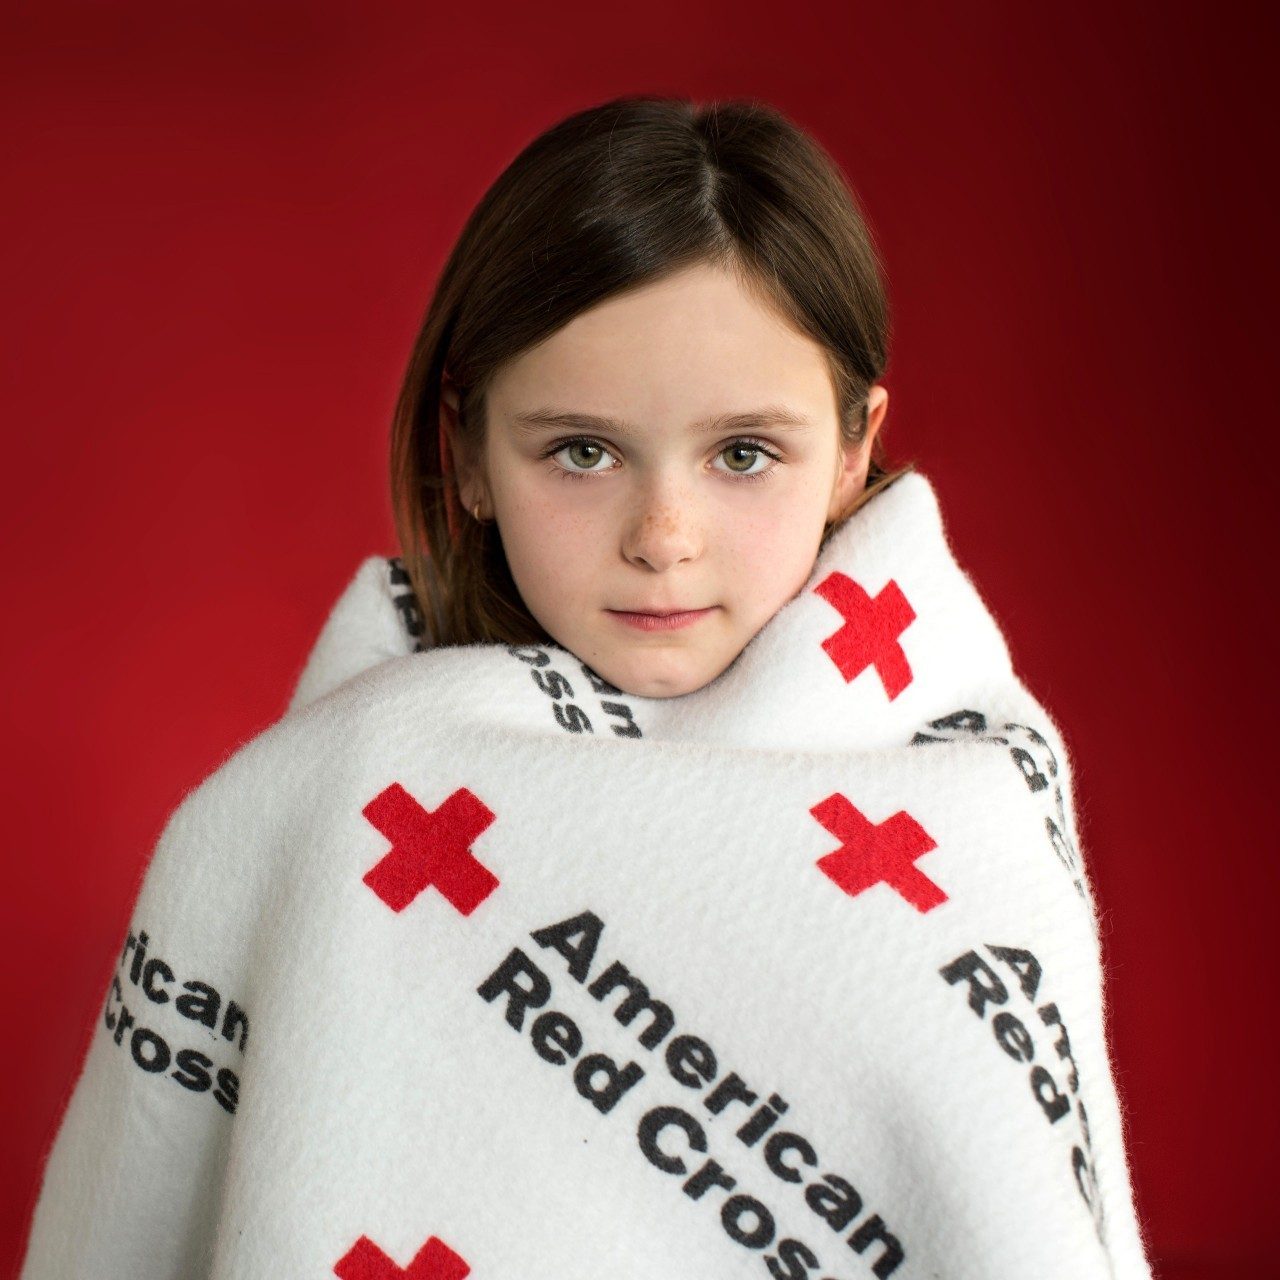 A young girl wrapped in a Red Cross blanket